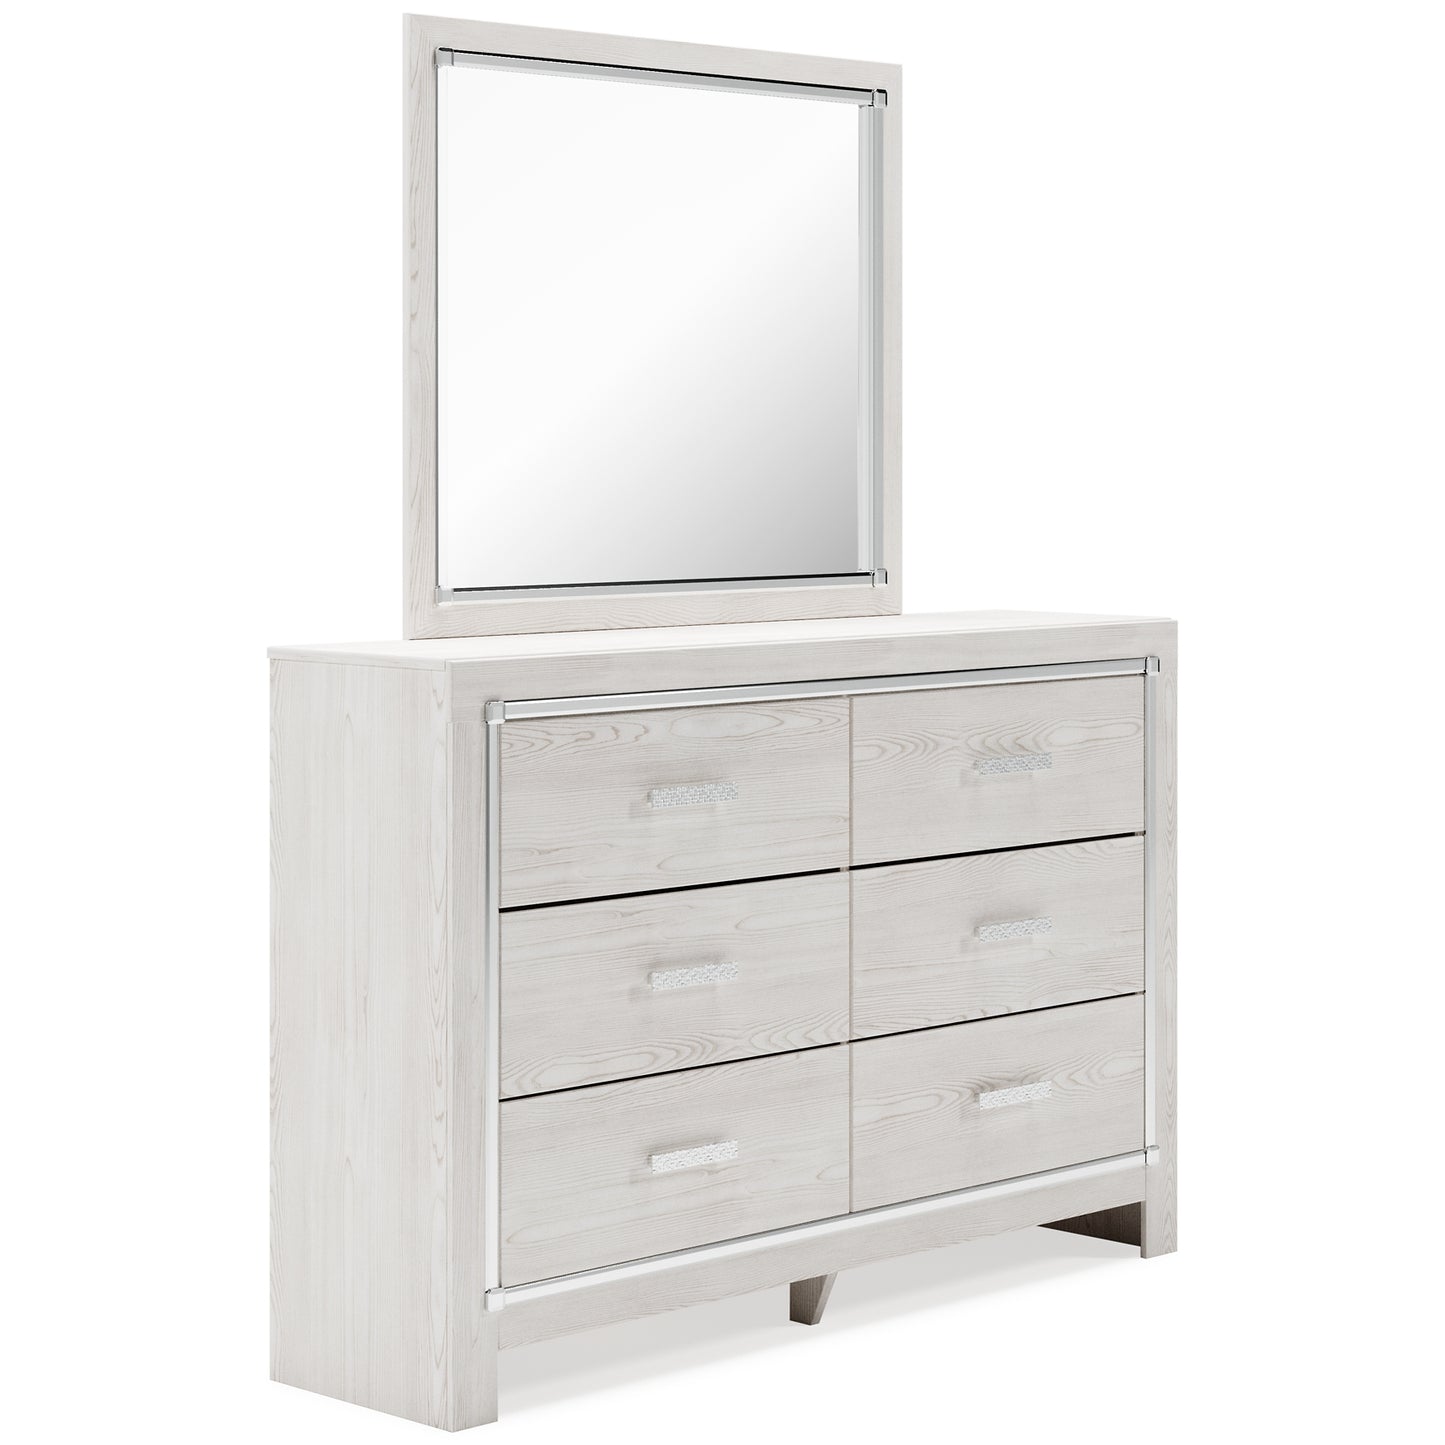 Altyra King Panel Headboard with Mirrored Dresser and Chest Wilson Furniture (OH)  in Bridgeport, Ohio. Serving Bridgeport, Yorkville, Bellaire, & Avondale